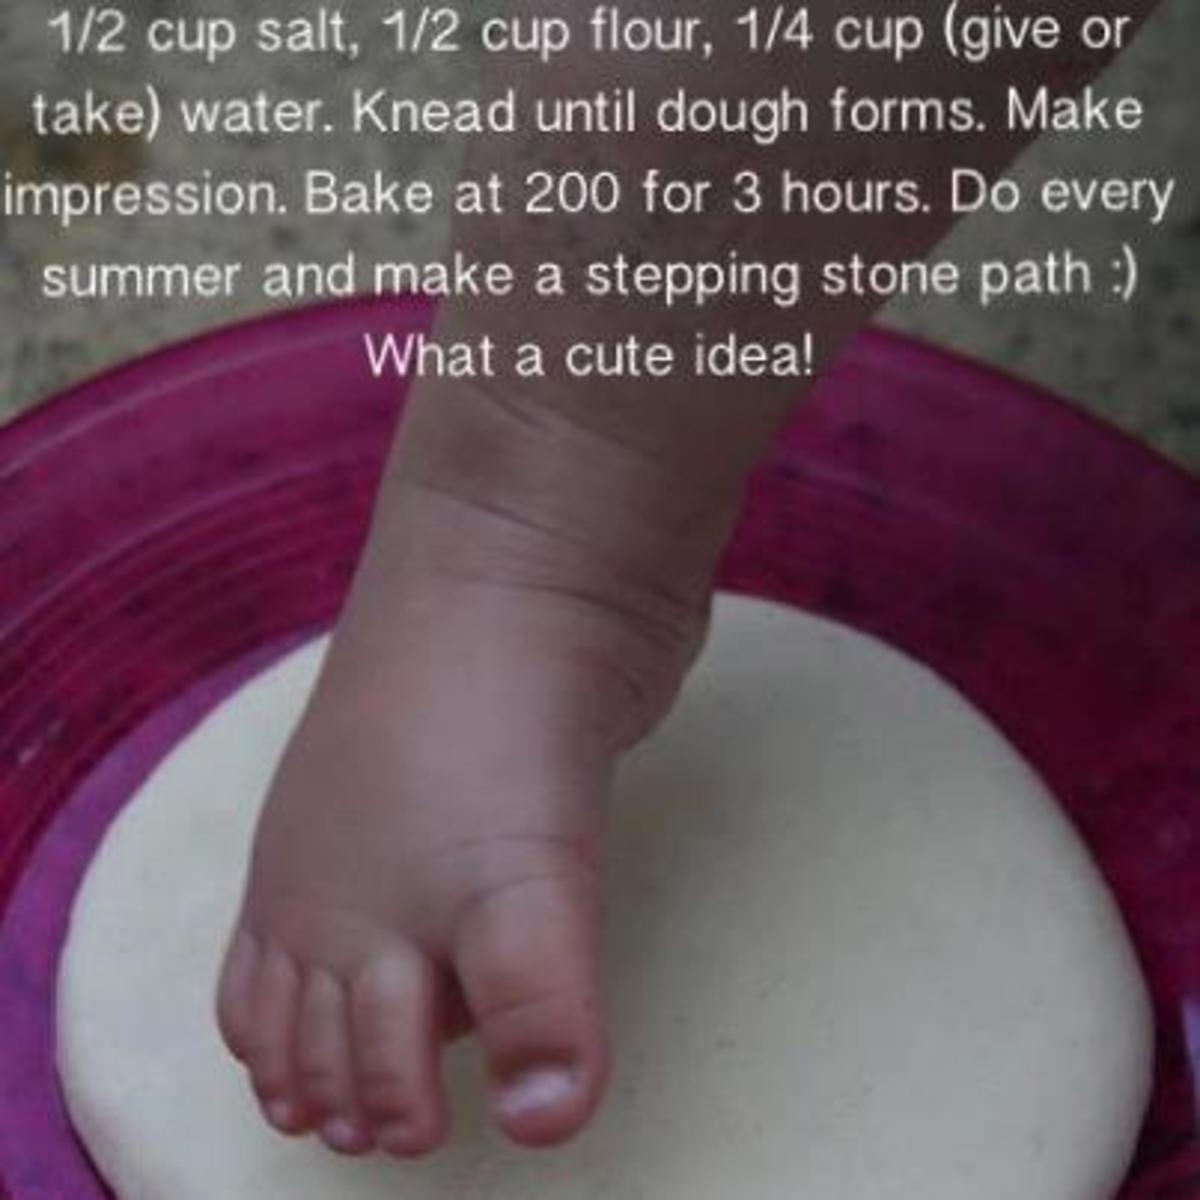 How to Make Homemade Stepping Stones With Flour